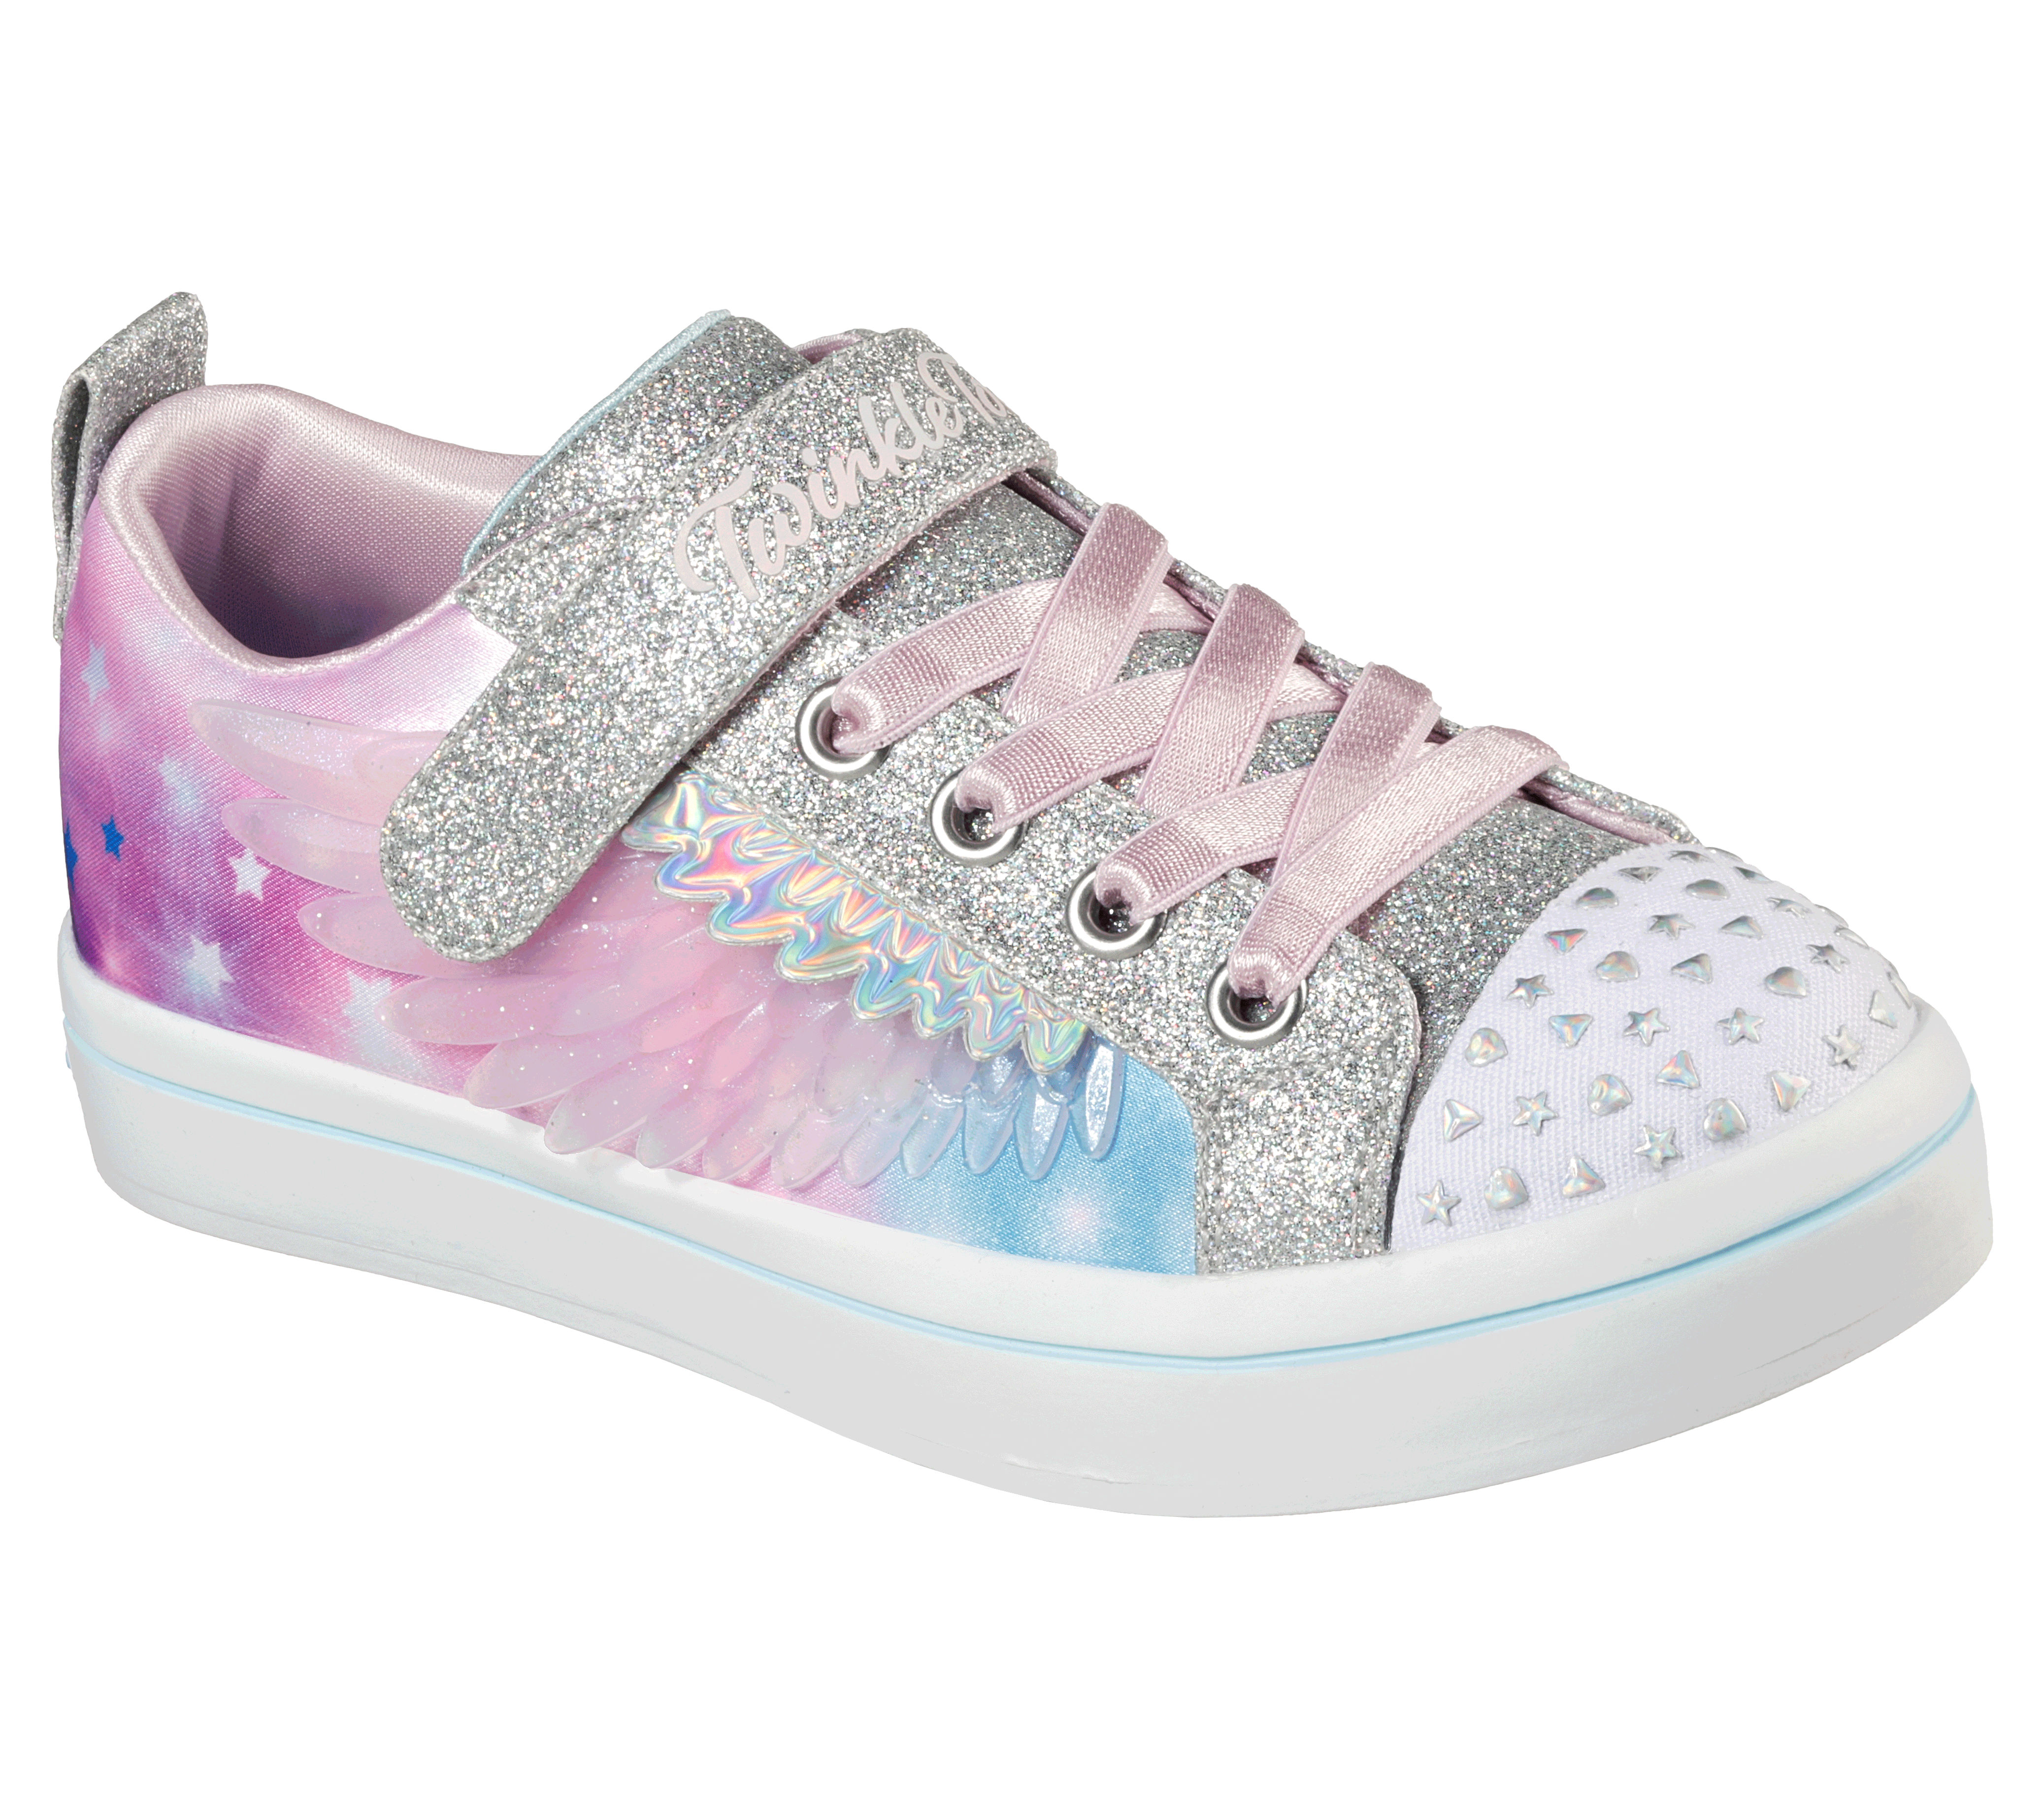 Shop the Twinkle Toes: Twi-Lites 